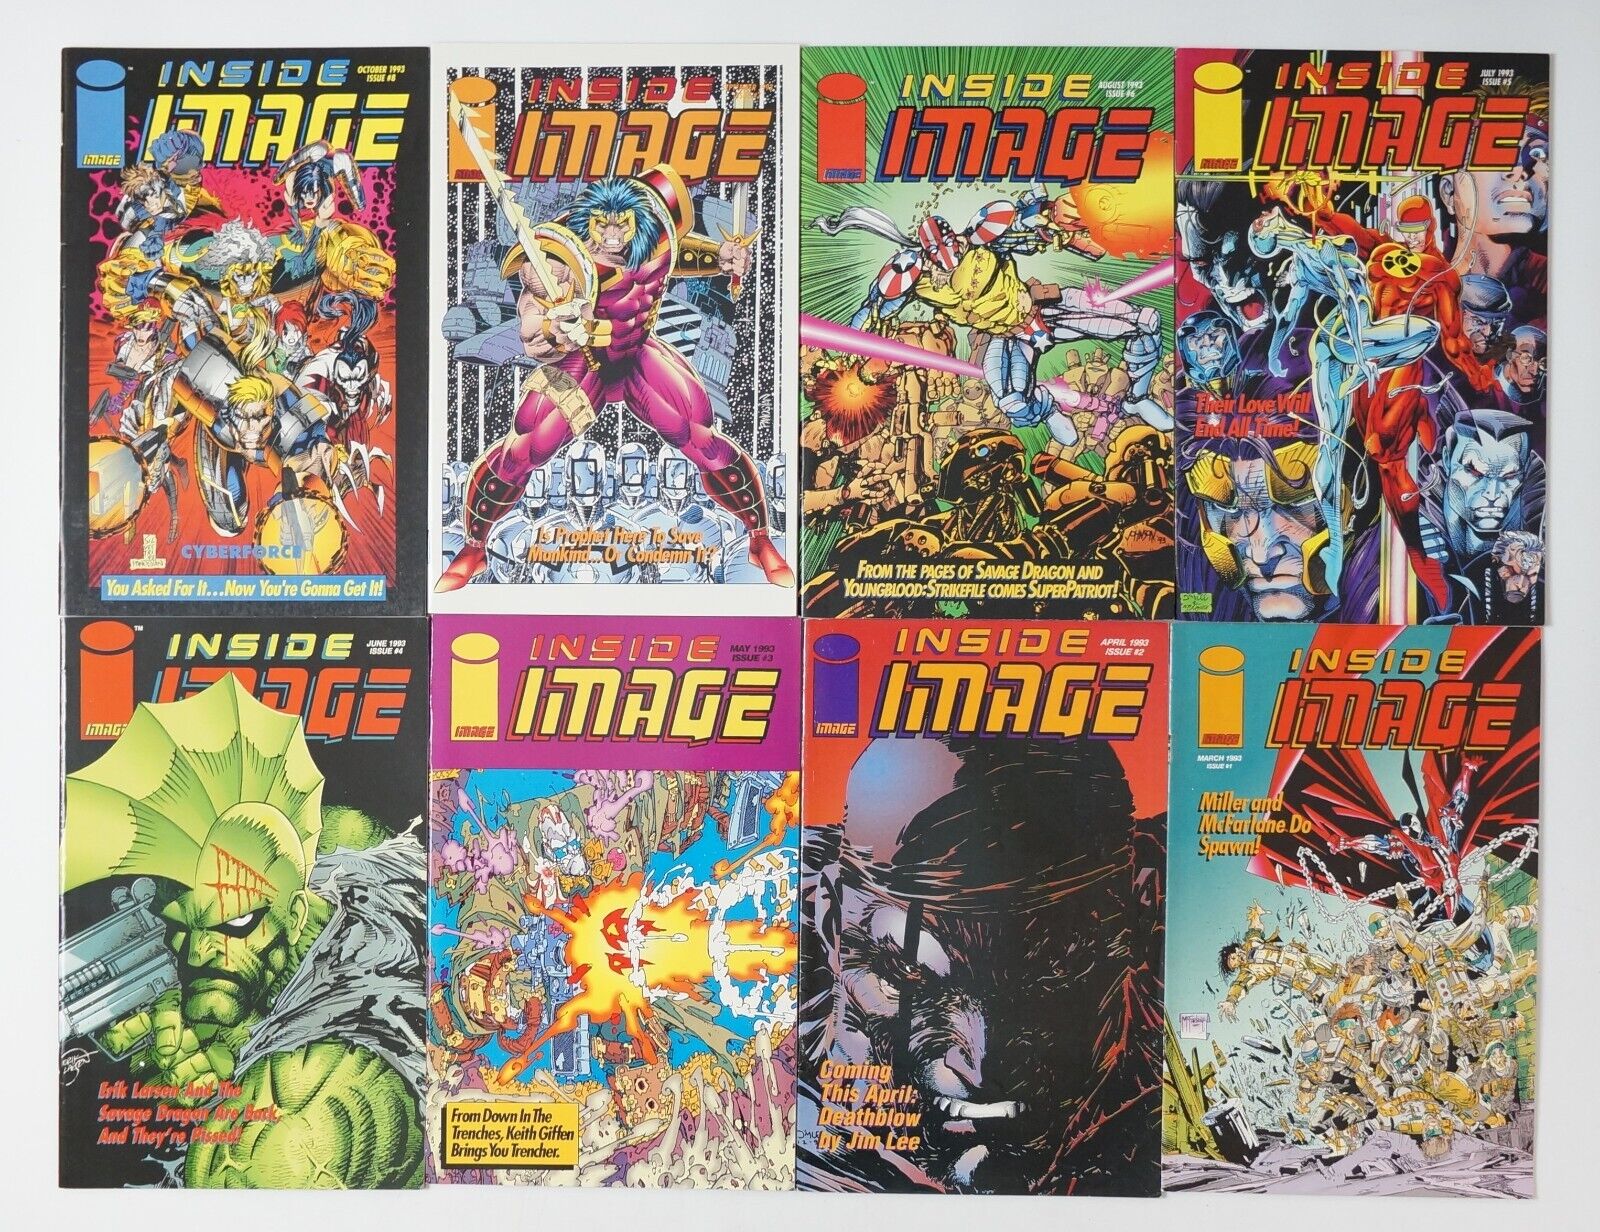 Inside Image #1-26 FN/VF complete series Spawn Deathblow Trencher Maxx Pitt